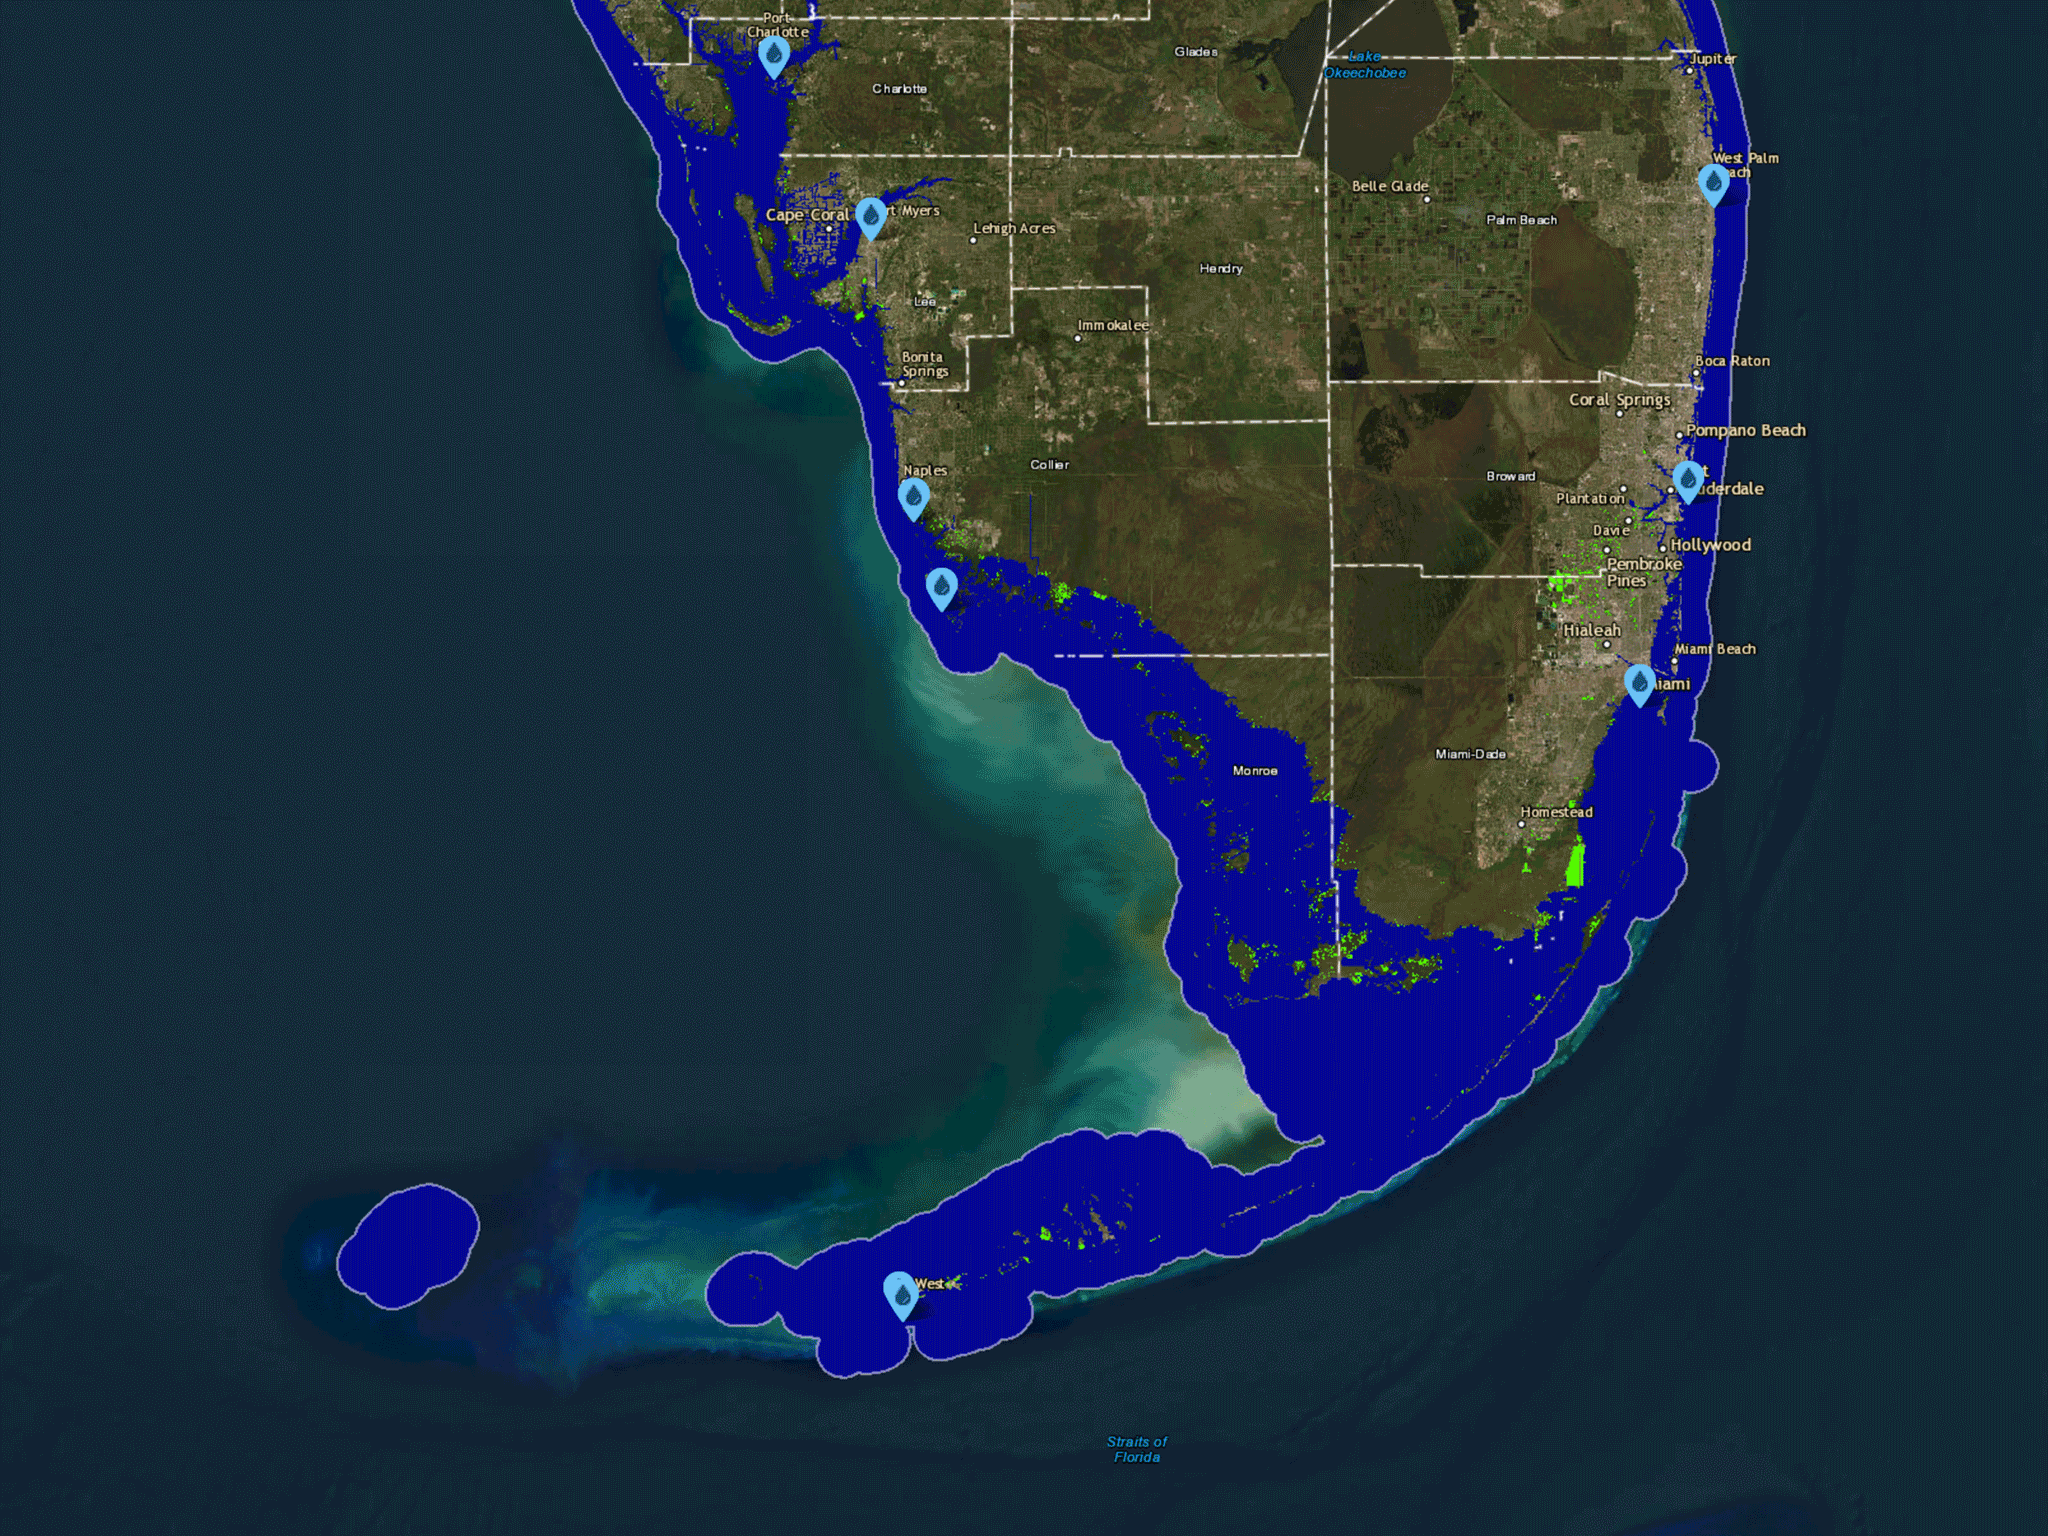 A GIF image shows a satellite view of the southern tip of Florida and the progressive rise of water along the coastline